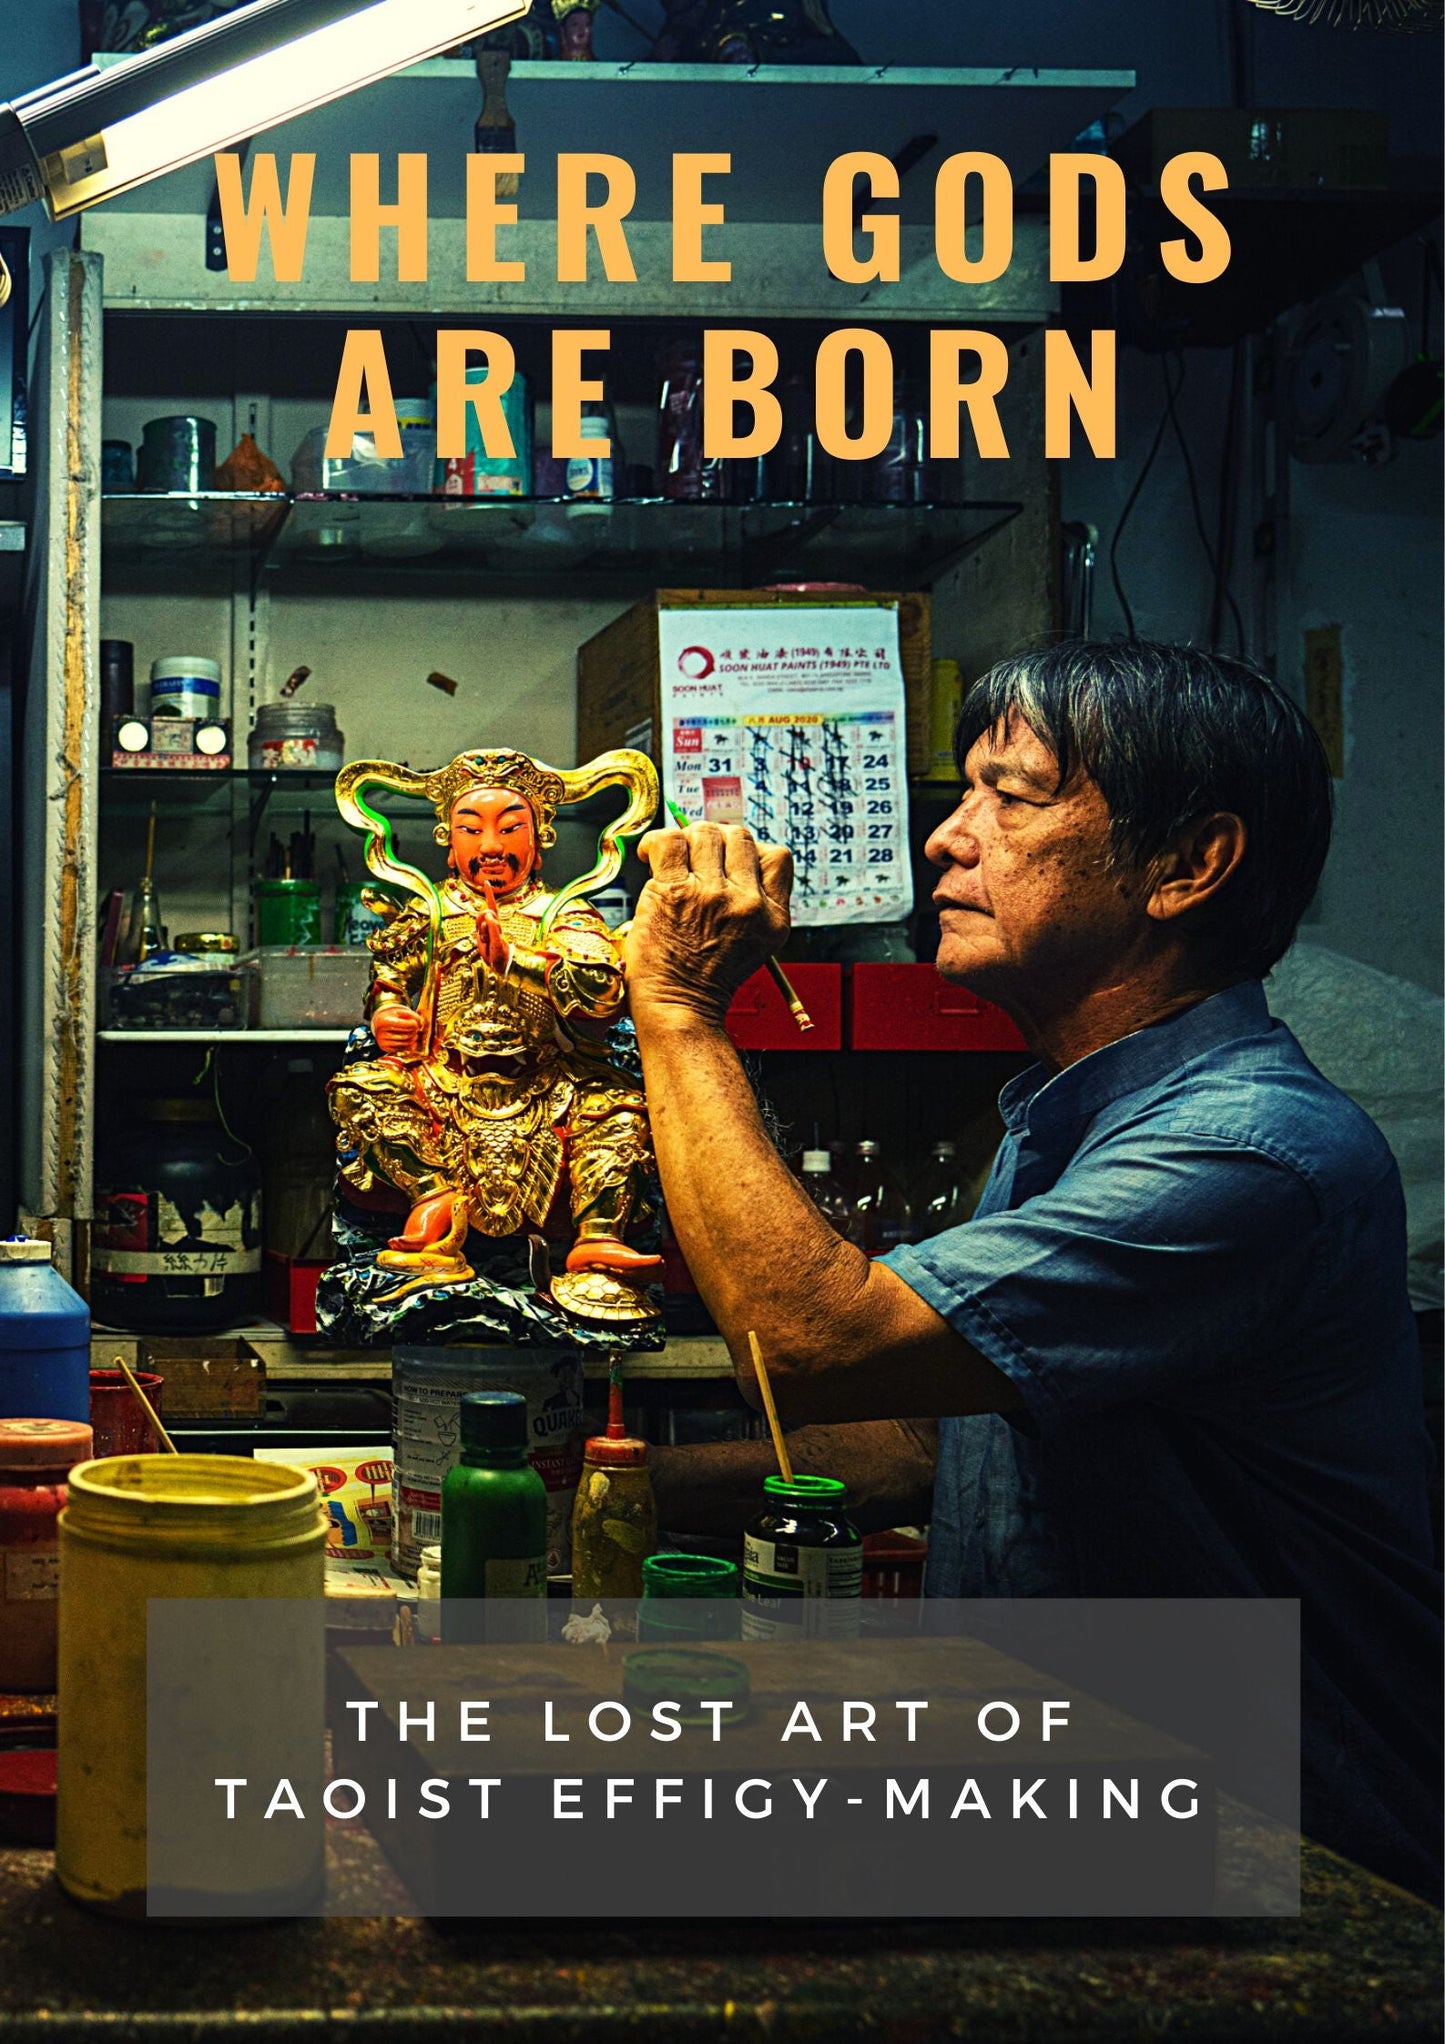 Discover the lost art of Taoist effigy-making